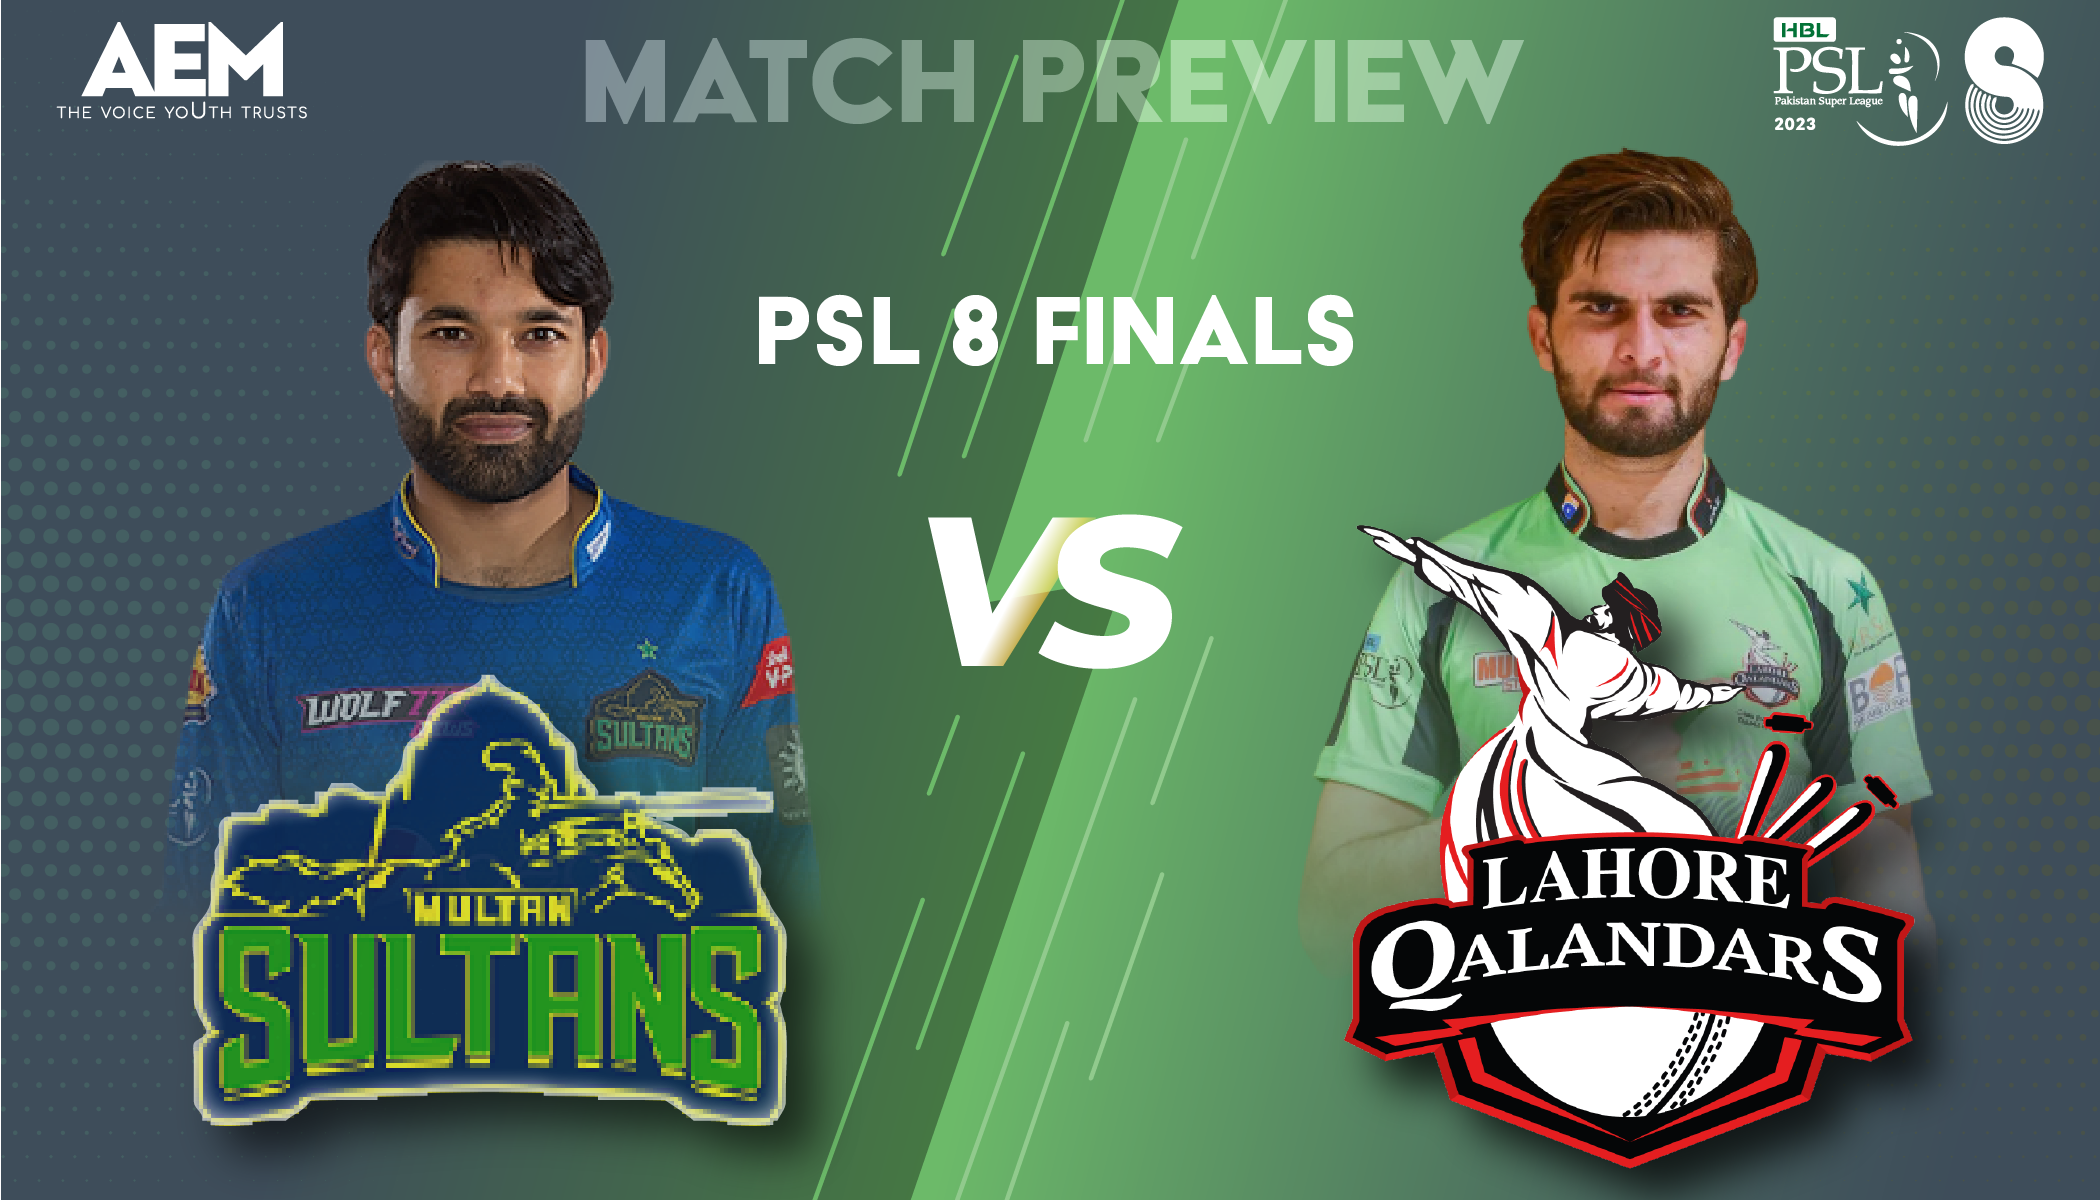 Match preview of Multan Sultans and Lahore Qalandars